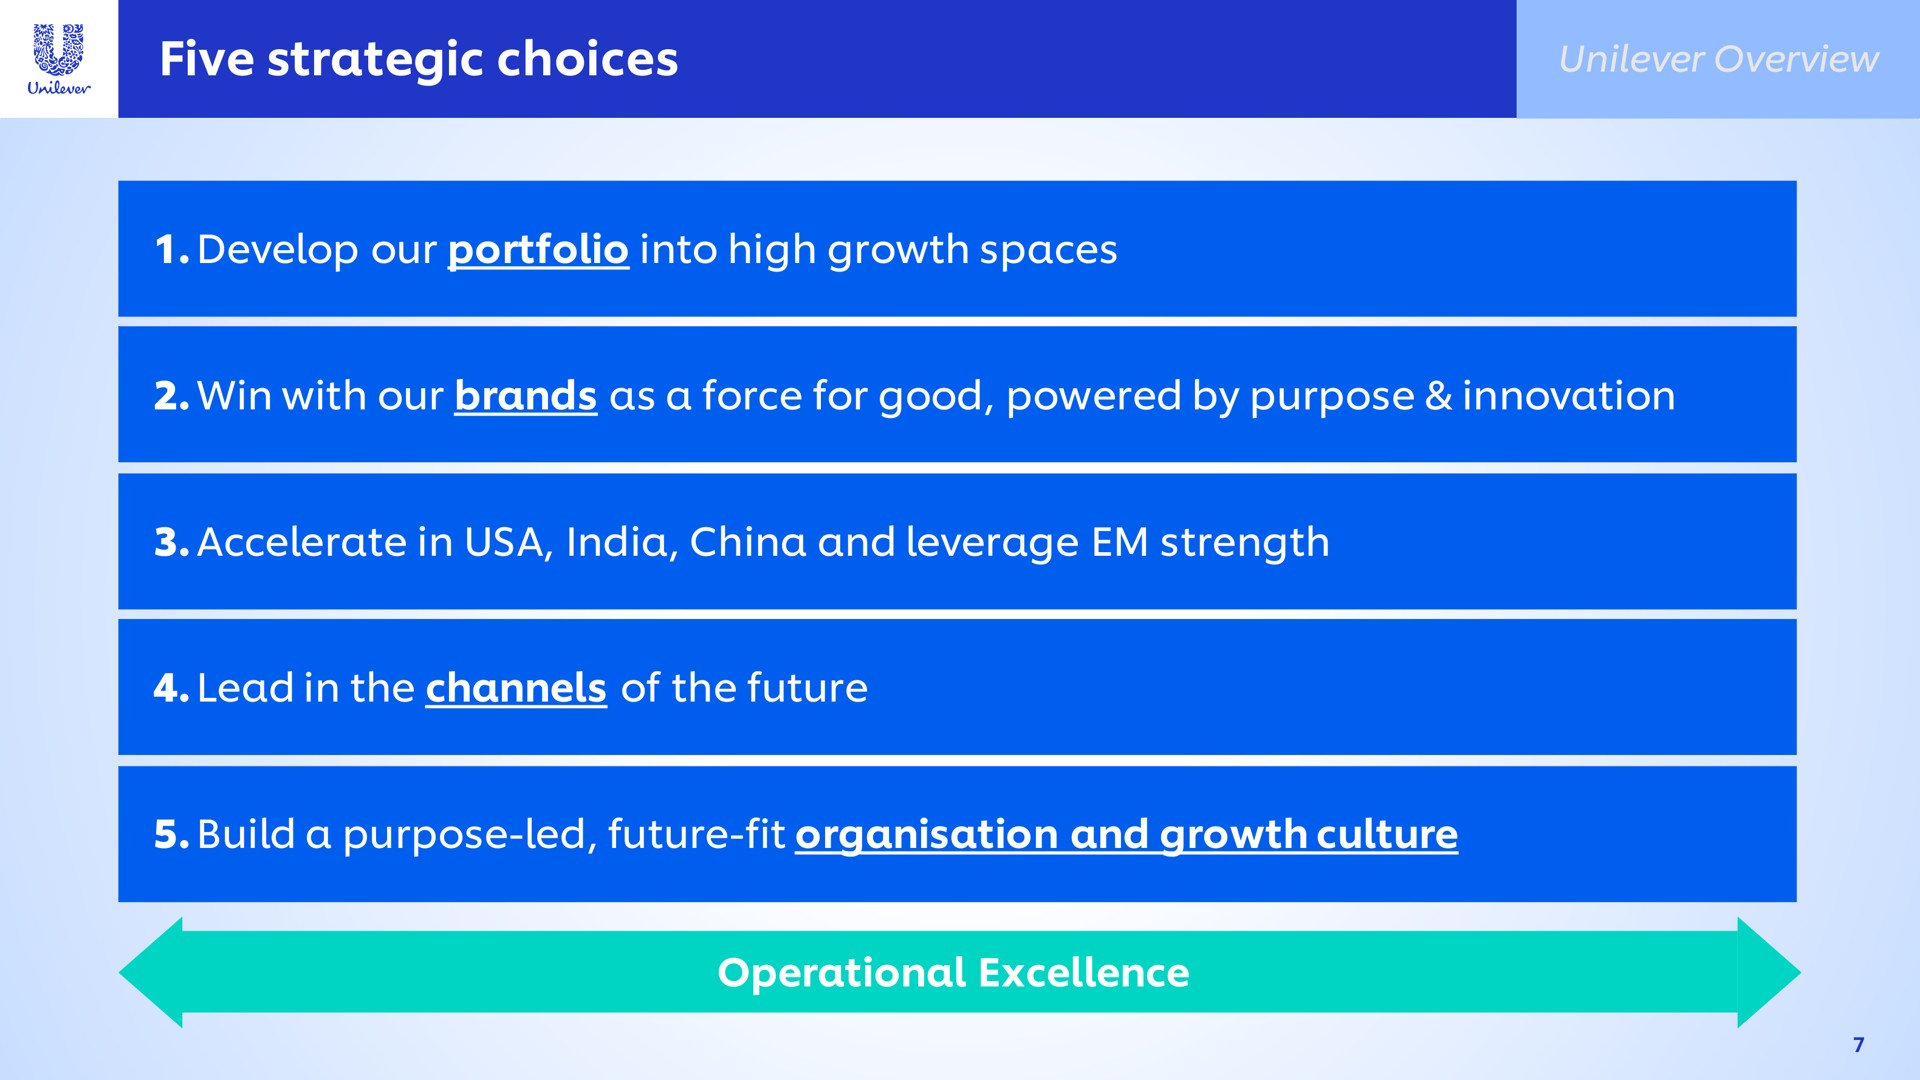 five strategic choices develop our portfolio into high growth spaces win with our brands as a force for good powered by purpose innovation accelerate in china and leverage strength lead channels of the future operational excellence build a purpose led future fit and growth culture | Unilever